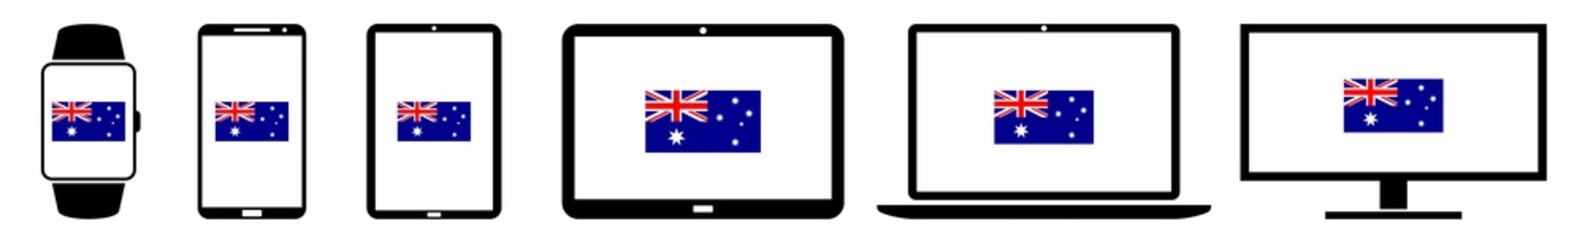 Australia Flag Display Icon Devices Set | Web Screen Australian State Device Online | Laptop Vector Illustration | Mobile Phone | PC Computer Smartphone Tablet Sign Isolated